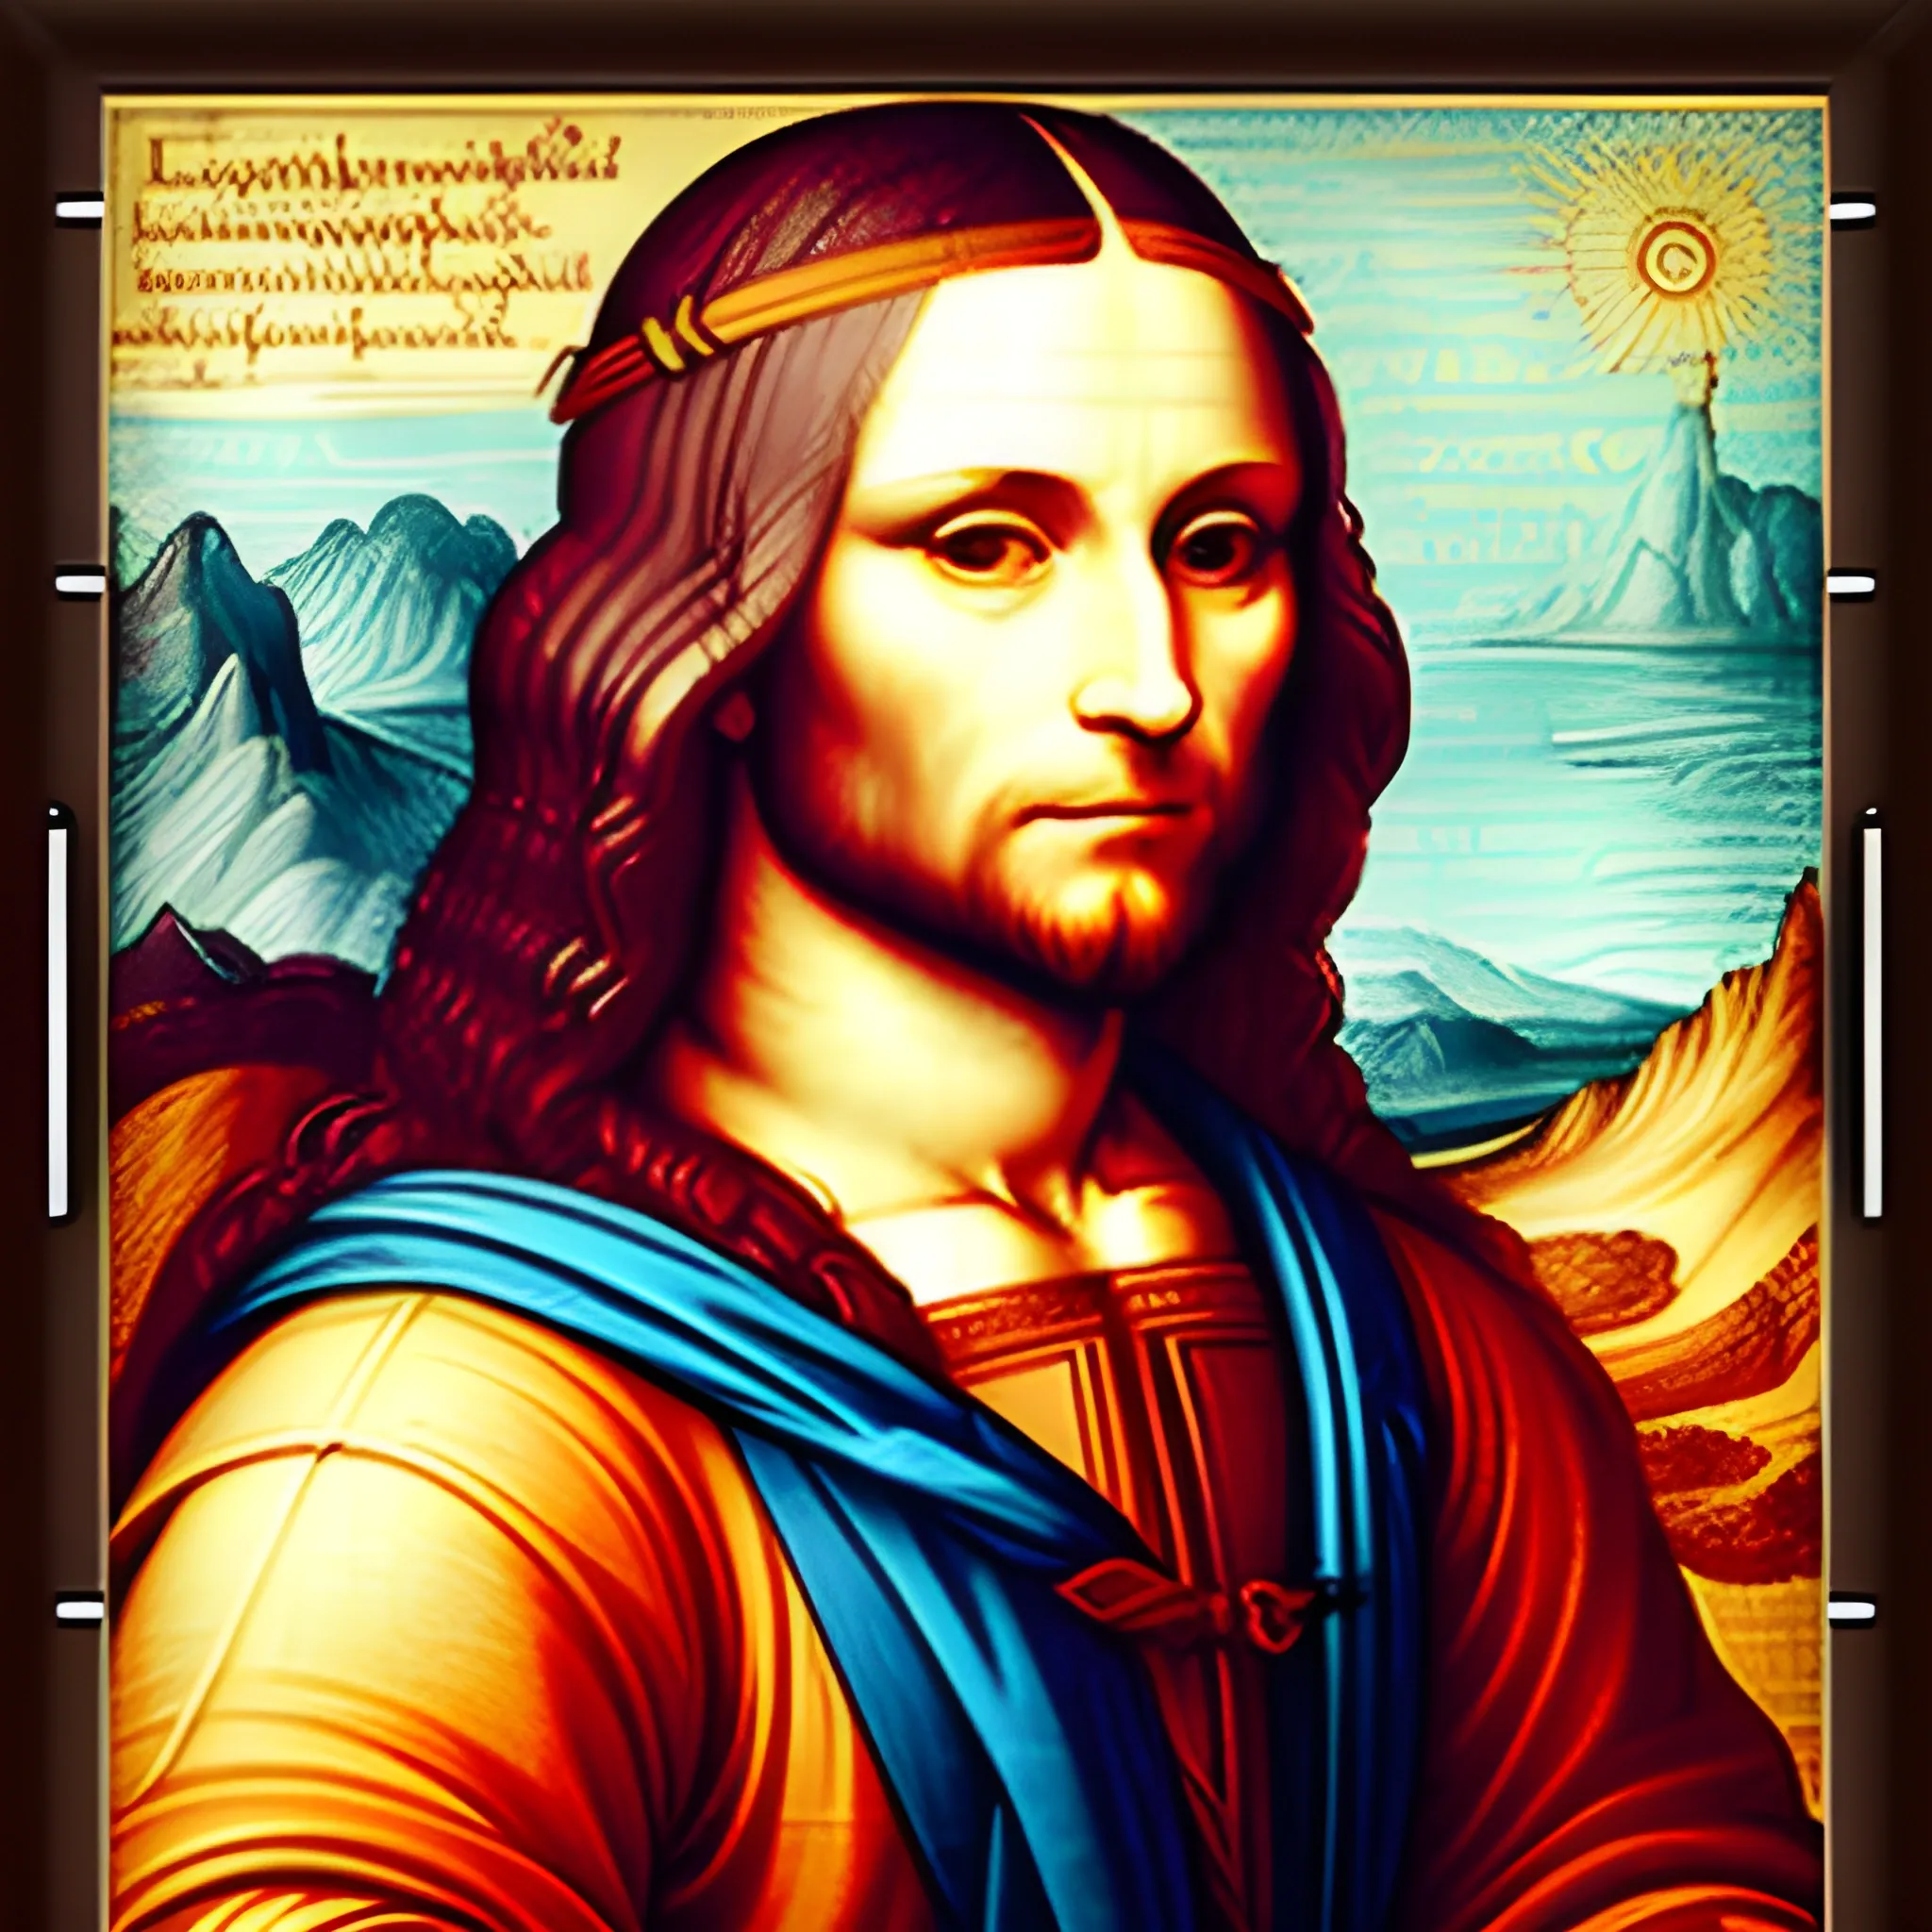 Generate a corporative, future, colorful, modern image, creative invention, related to digital products, Leonardo da Vinci self portrait, do not use machines or txt and use really environment,Trippy